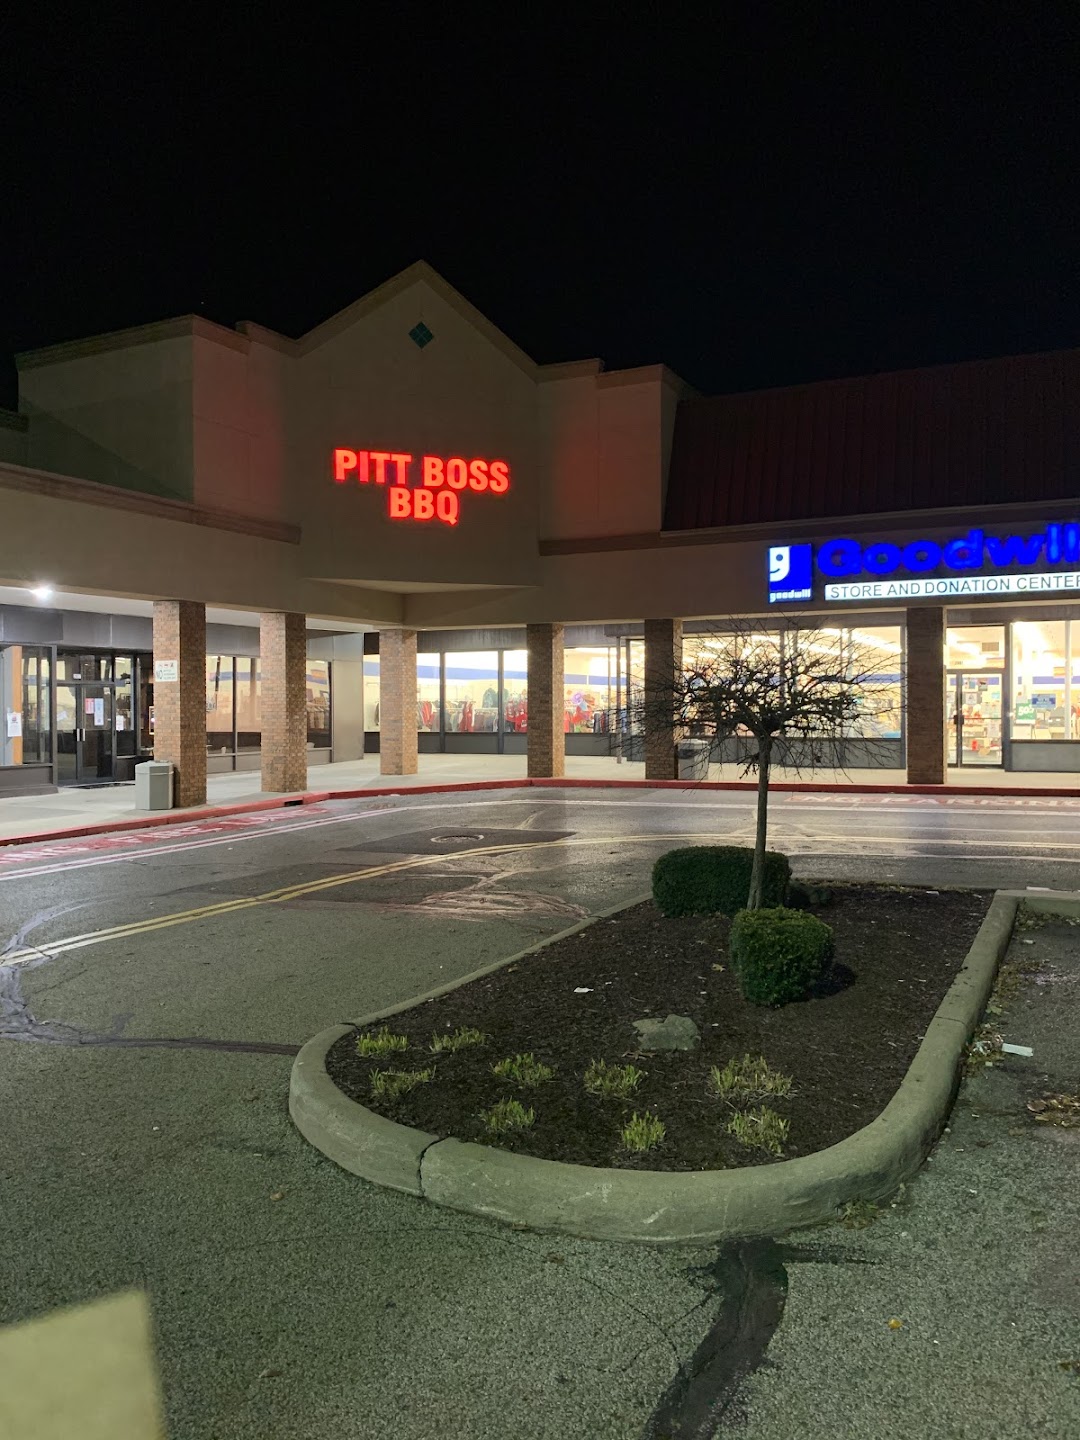 The Pitt Boss BBQ and Gamers Lounge